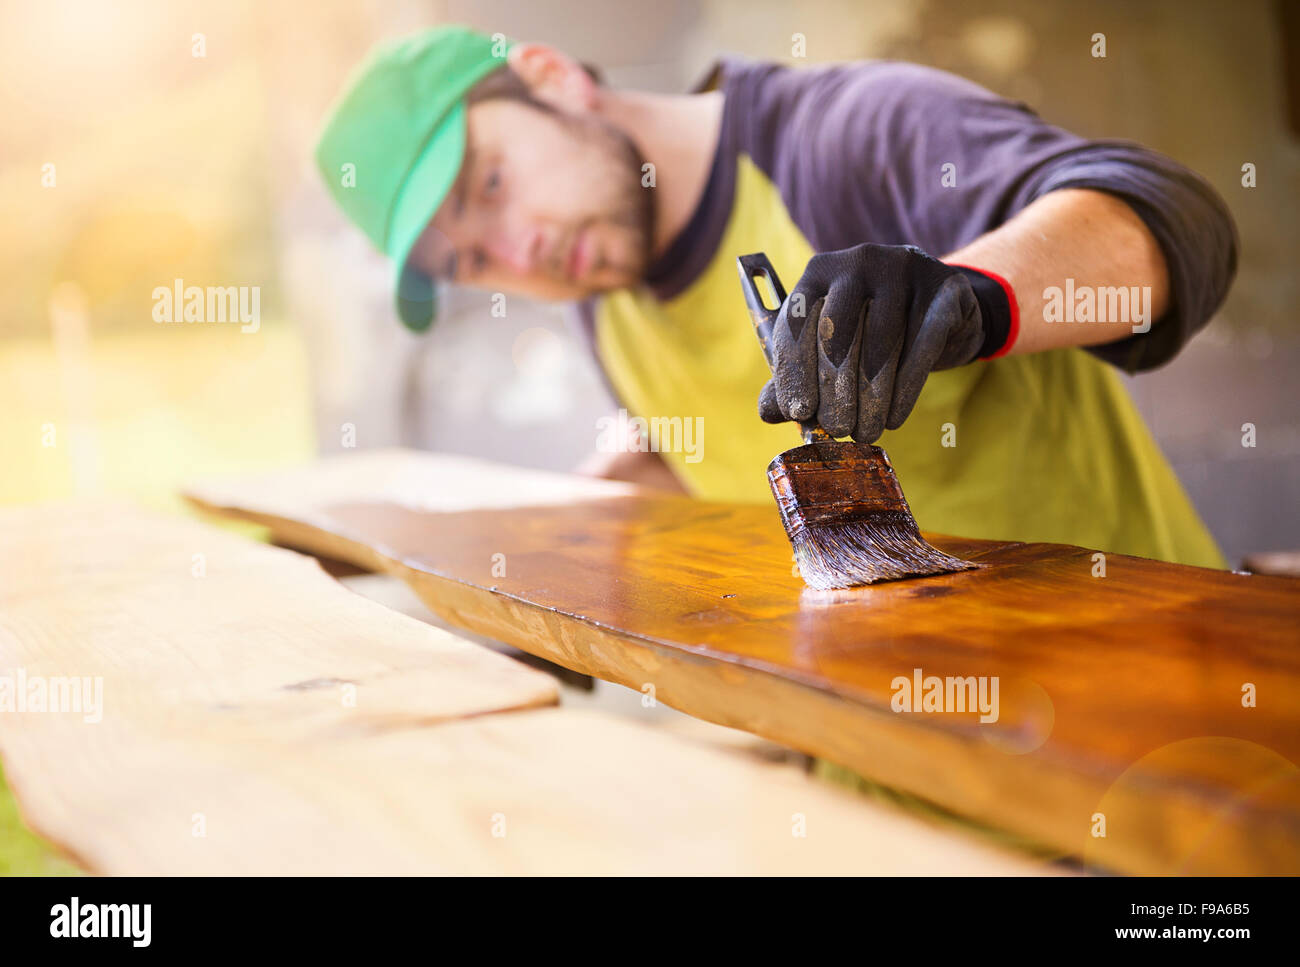 Handyman varnishing pine wooden planks in patio outside the new house Stock Photo